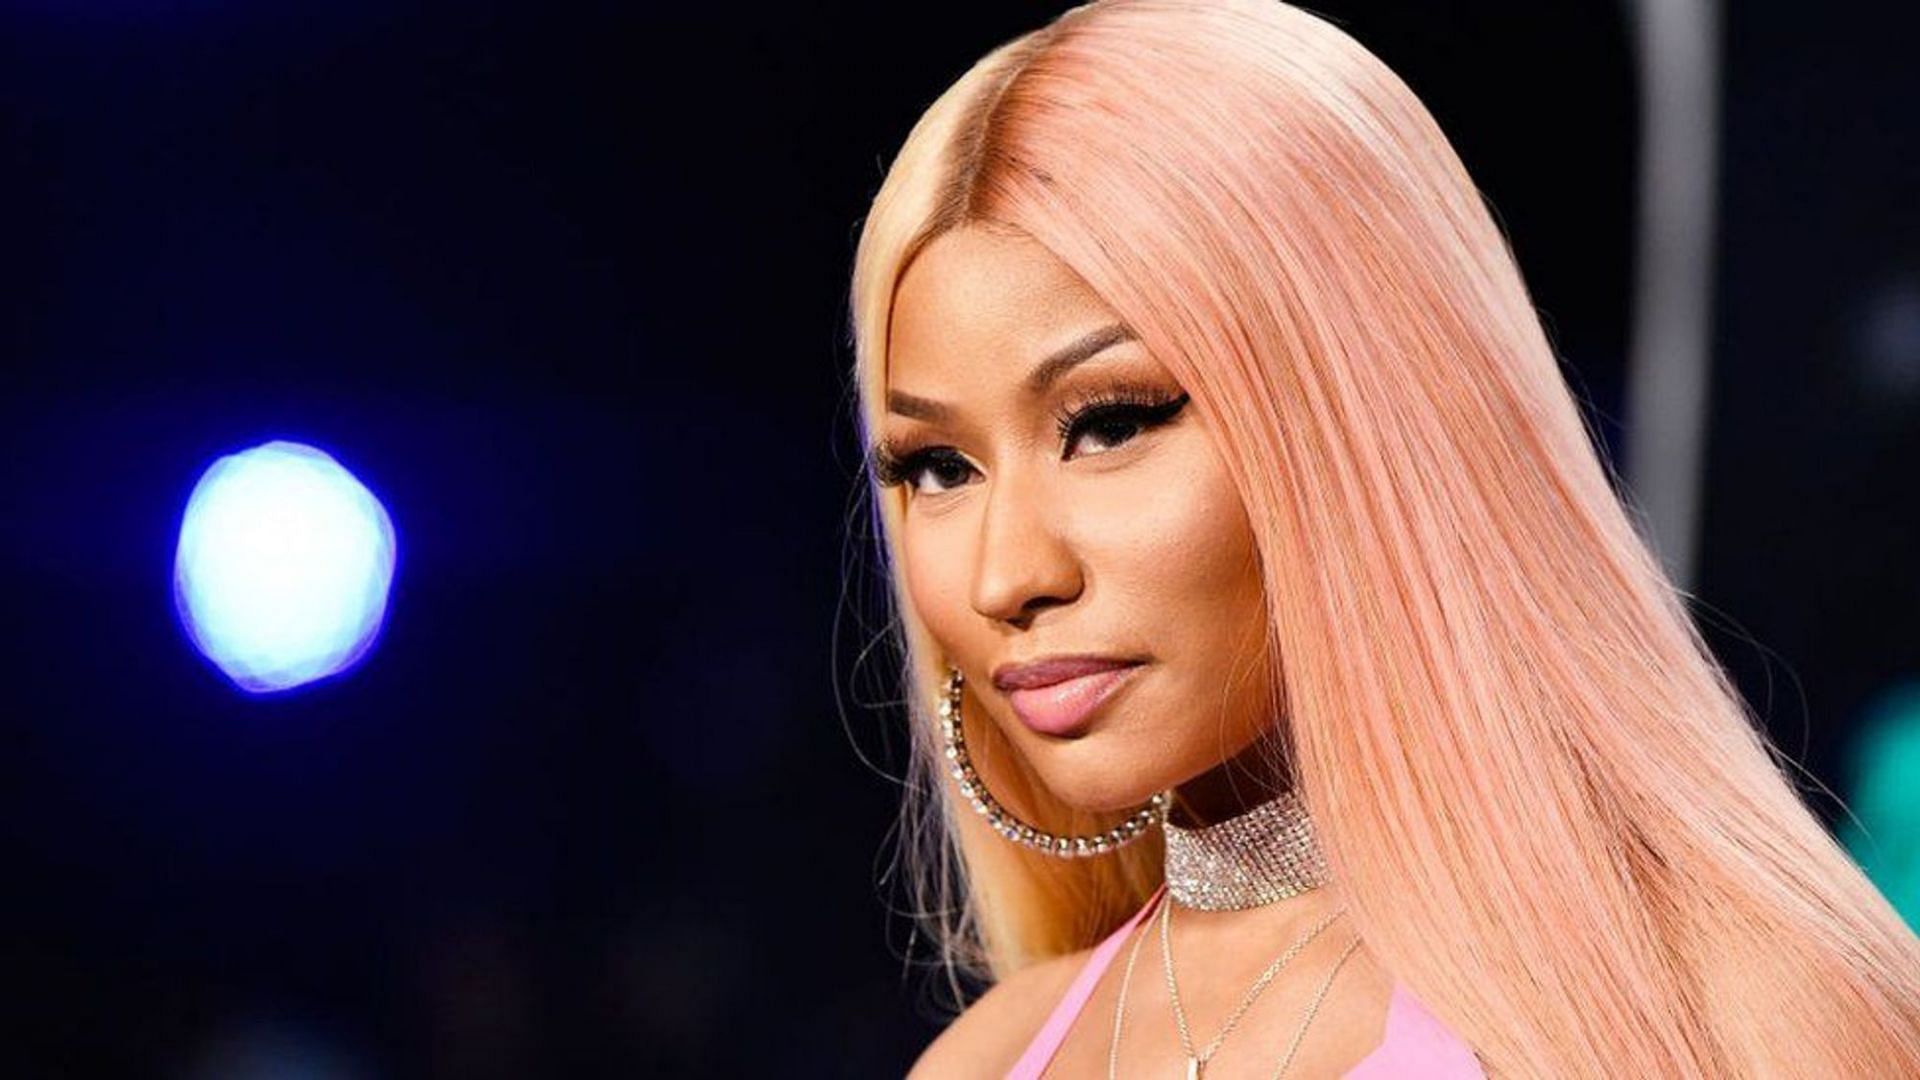 Nicki Minaj responds to alleged ex-assistant's serious accusations (Image via Getty Images)